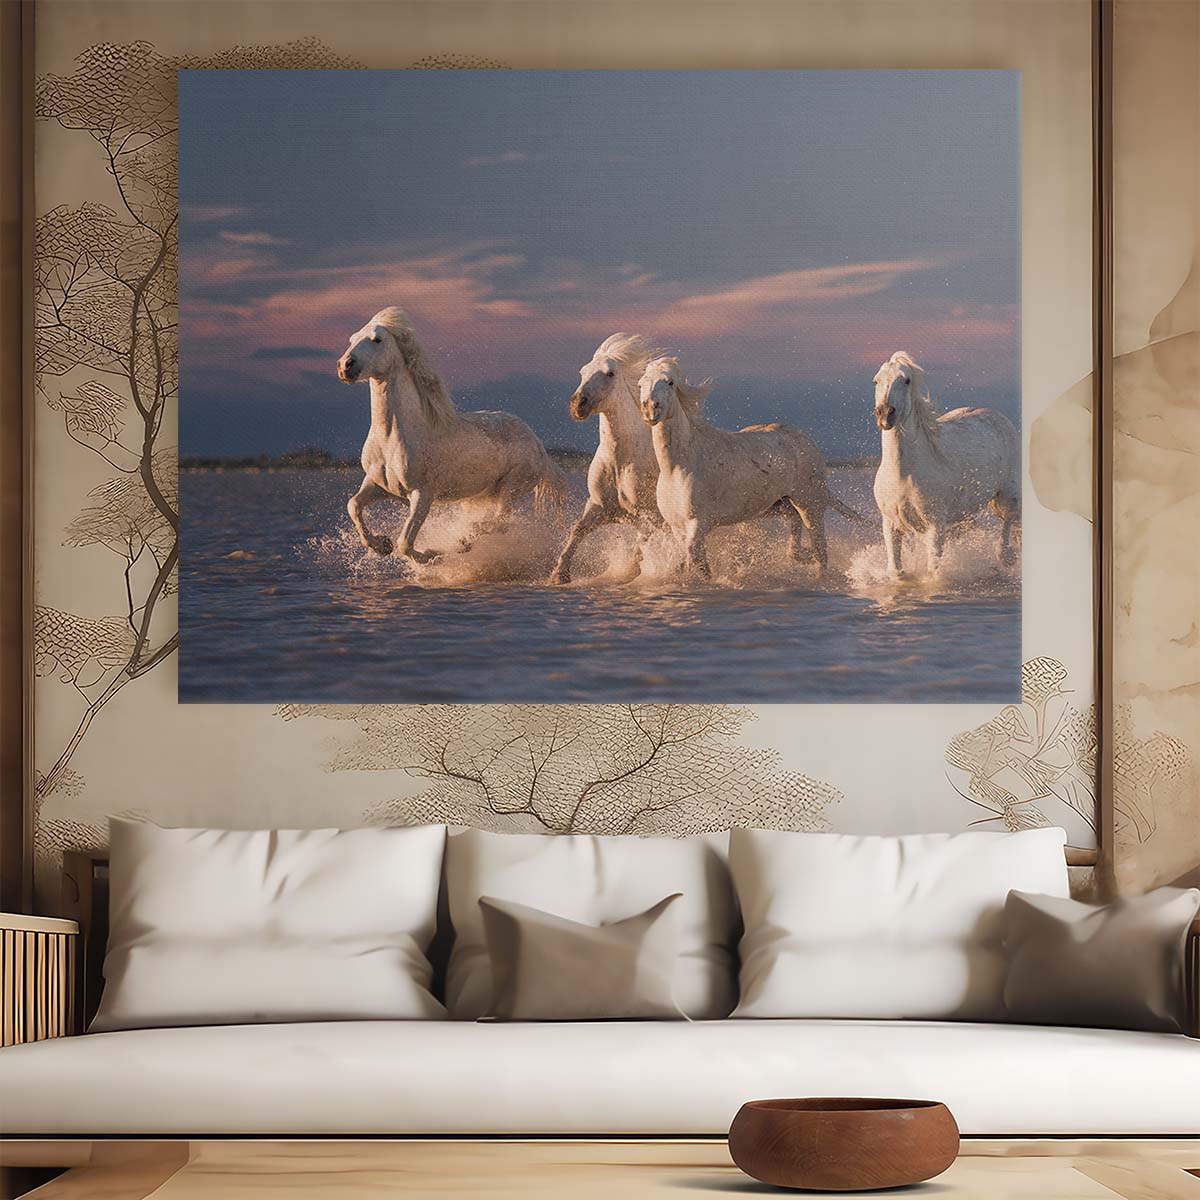 Camargue Horses' Sunset Sprint in Water Wall Art by Luxuriance Designs. Made in USA.